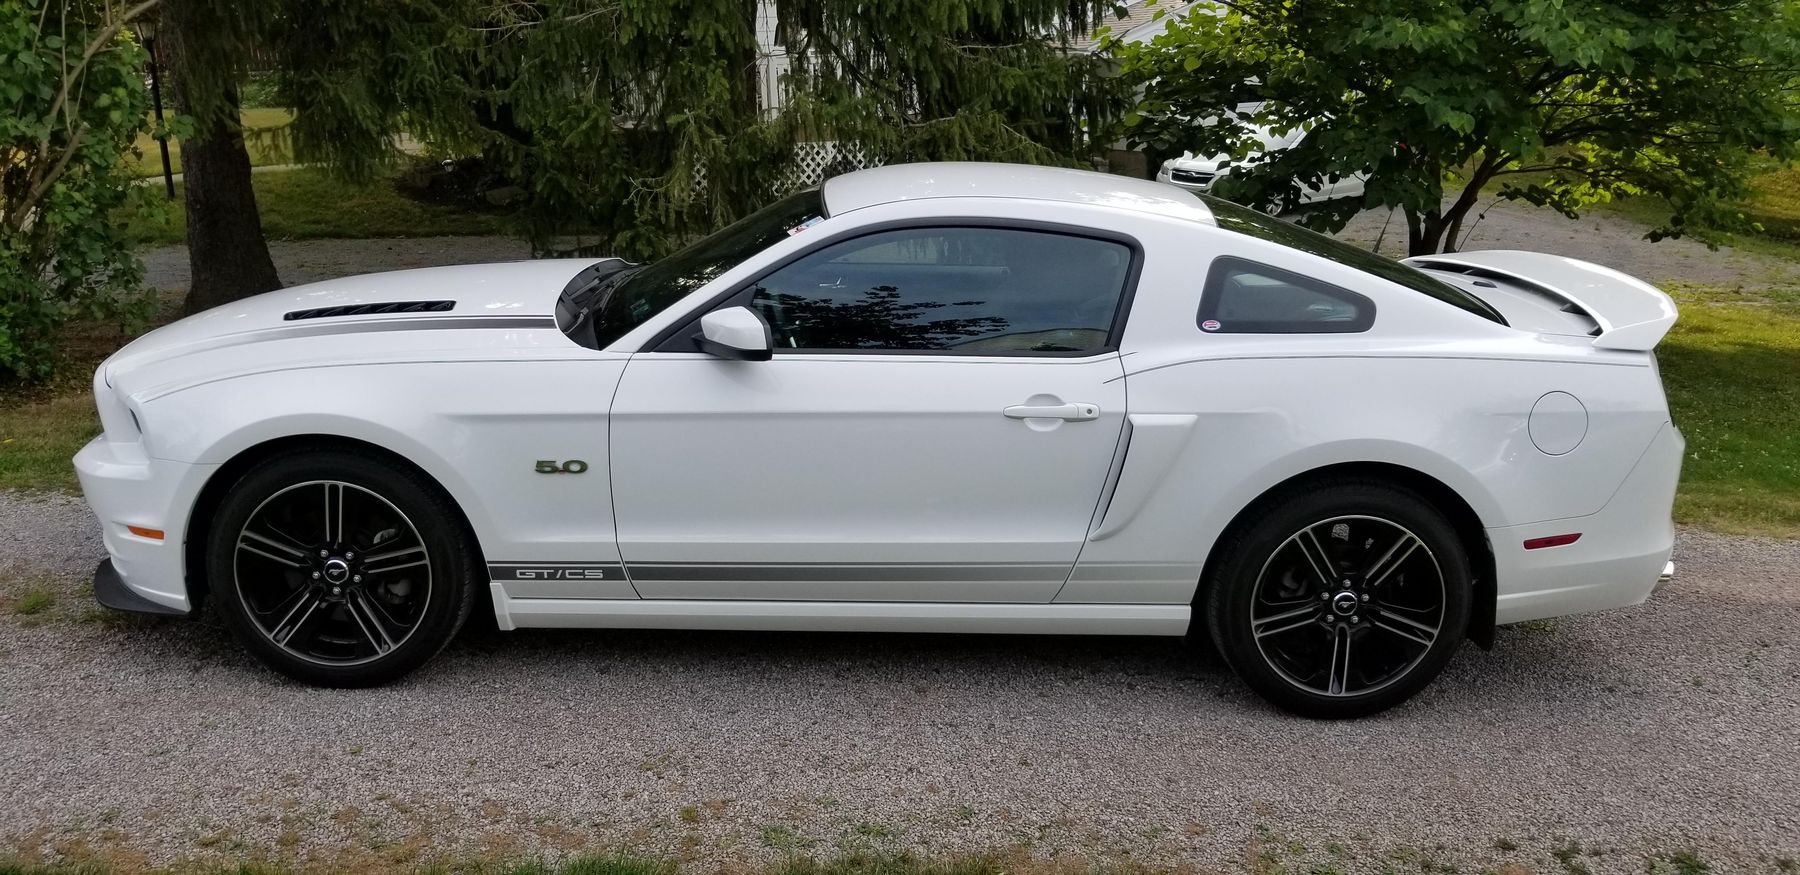 Late S197 Mustang GT California Special Is a Rare Stunner